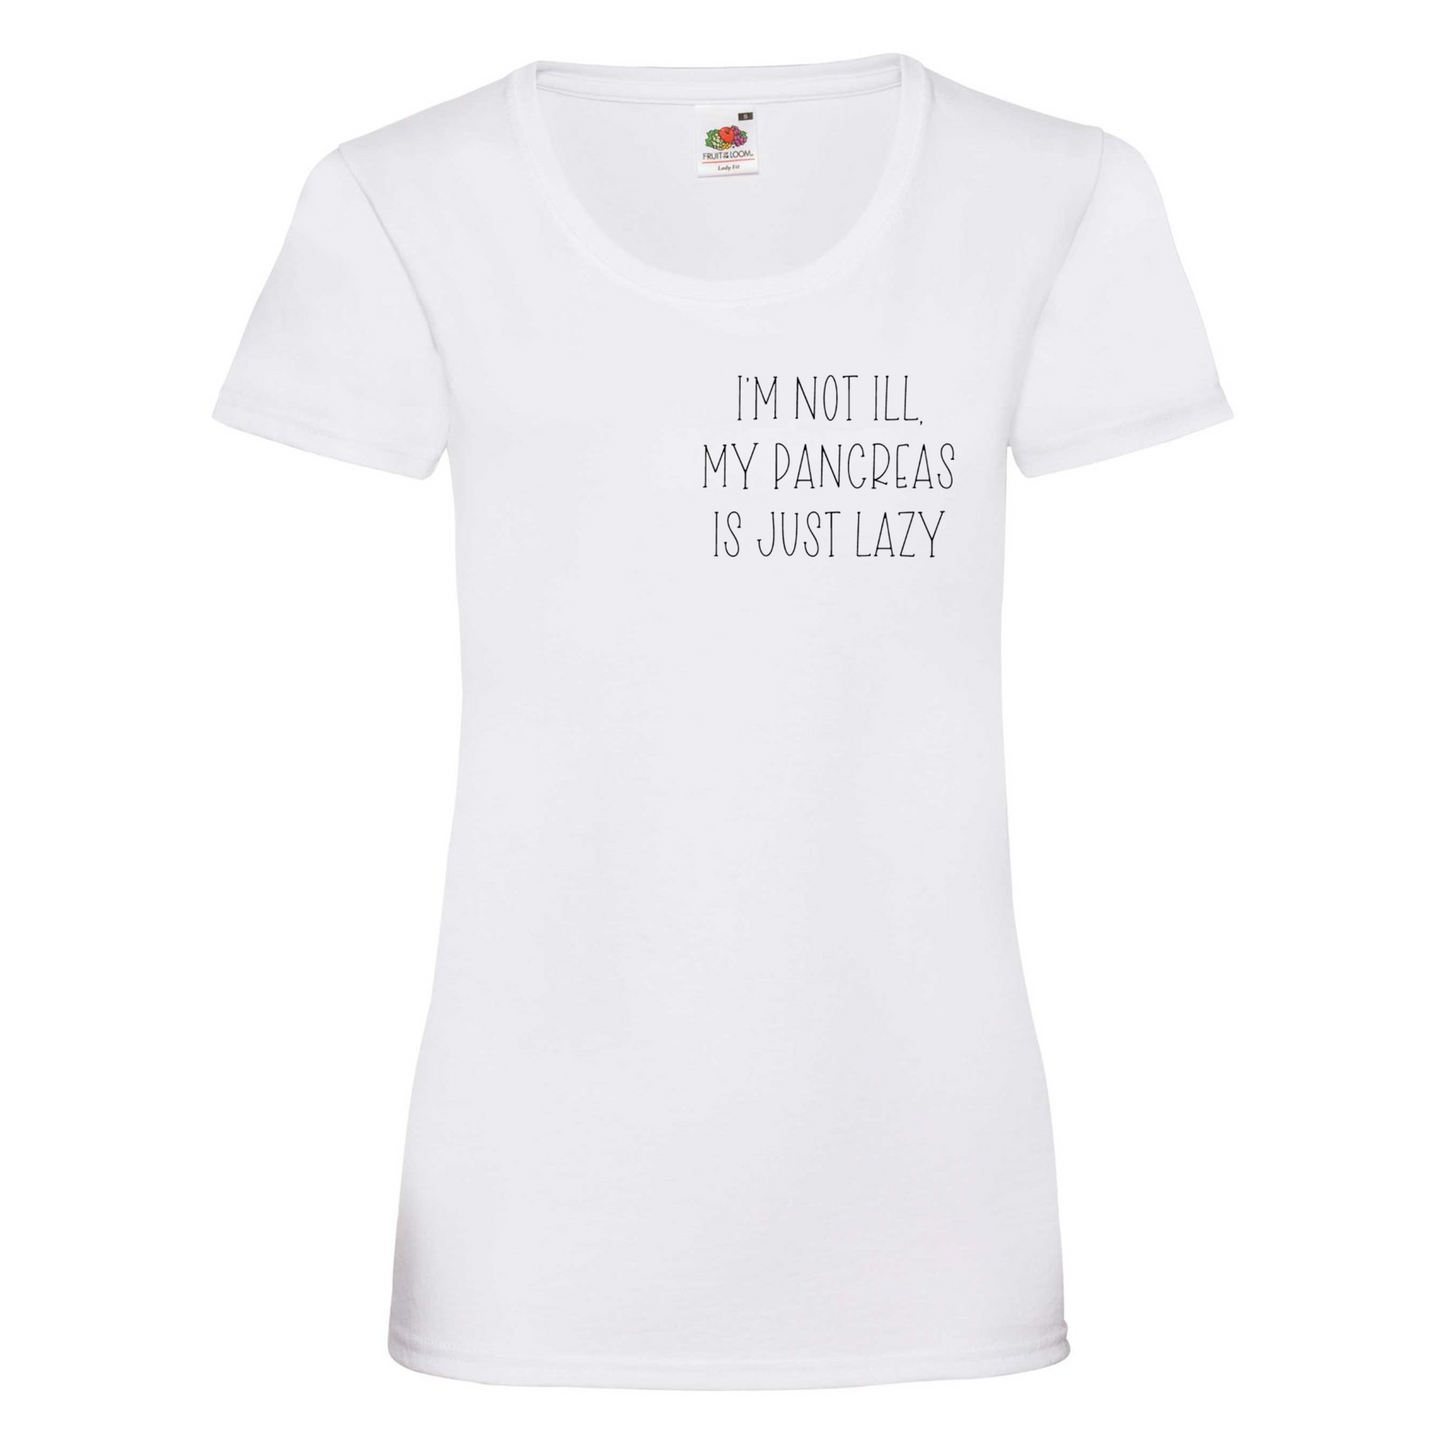 I'm Not Ill, My Pancreas Is Just Lazy Women's T Shirt